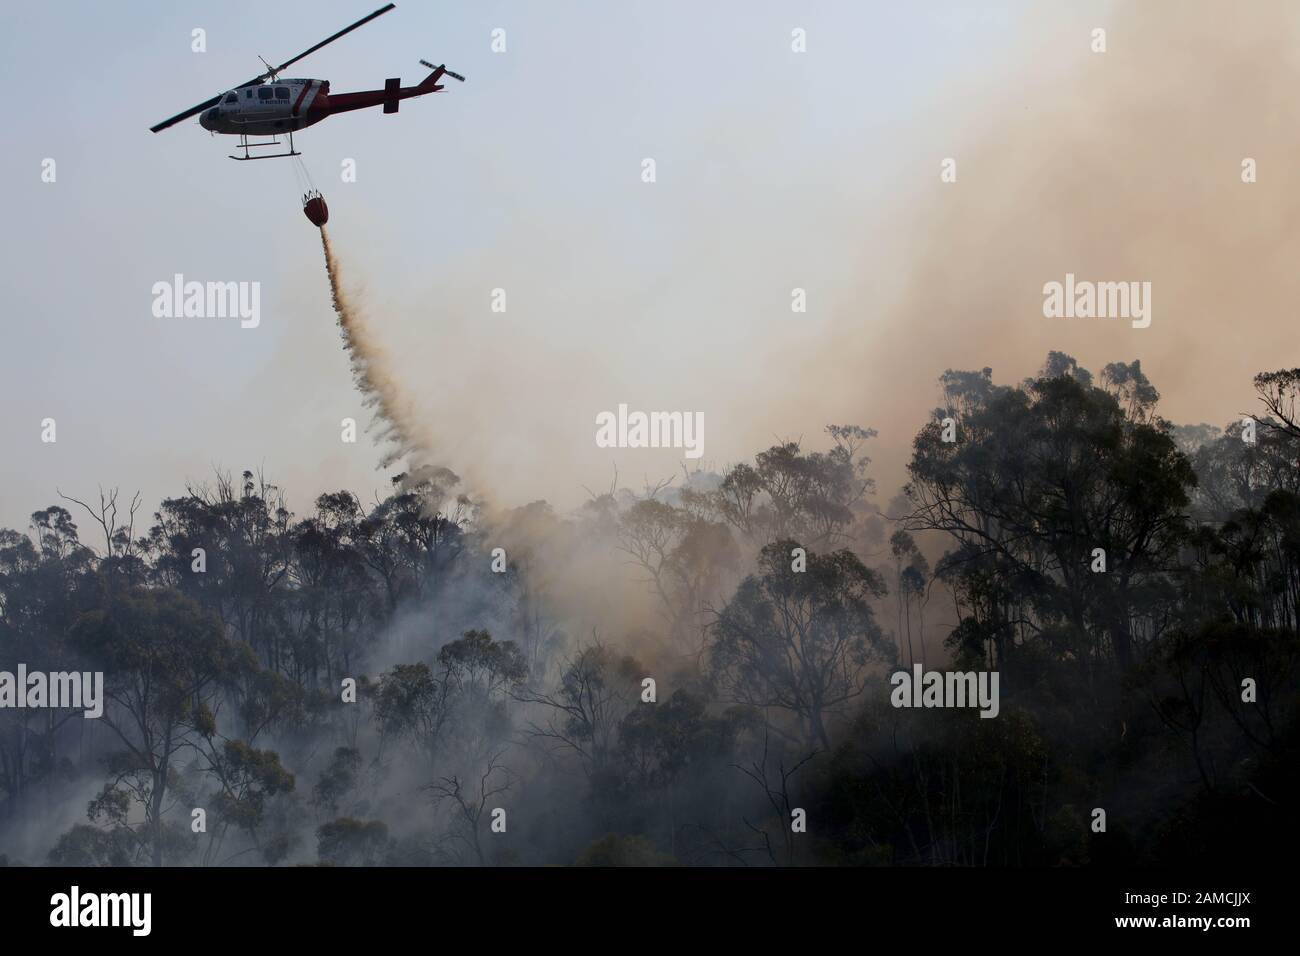 Victoria, Australia. 12th Jan, 2020. A helicopter does a water drop on a bushfire where a joint Australian and U.S. strike team blackline an area in order to control a the fire and protect nearby structures, in Alpine National Park near Omeo. The water drop reduces the heat and slows the fire helping the team on the ground. The Australian firefighters are with Country Fire Authority Australia and the U.S. team is the third rotation in for 28 days and they come from five different U.S. agencies. Credit: ZUMA Press, Inc./Alamy Live News Stock Photo